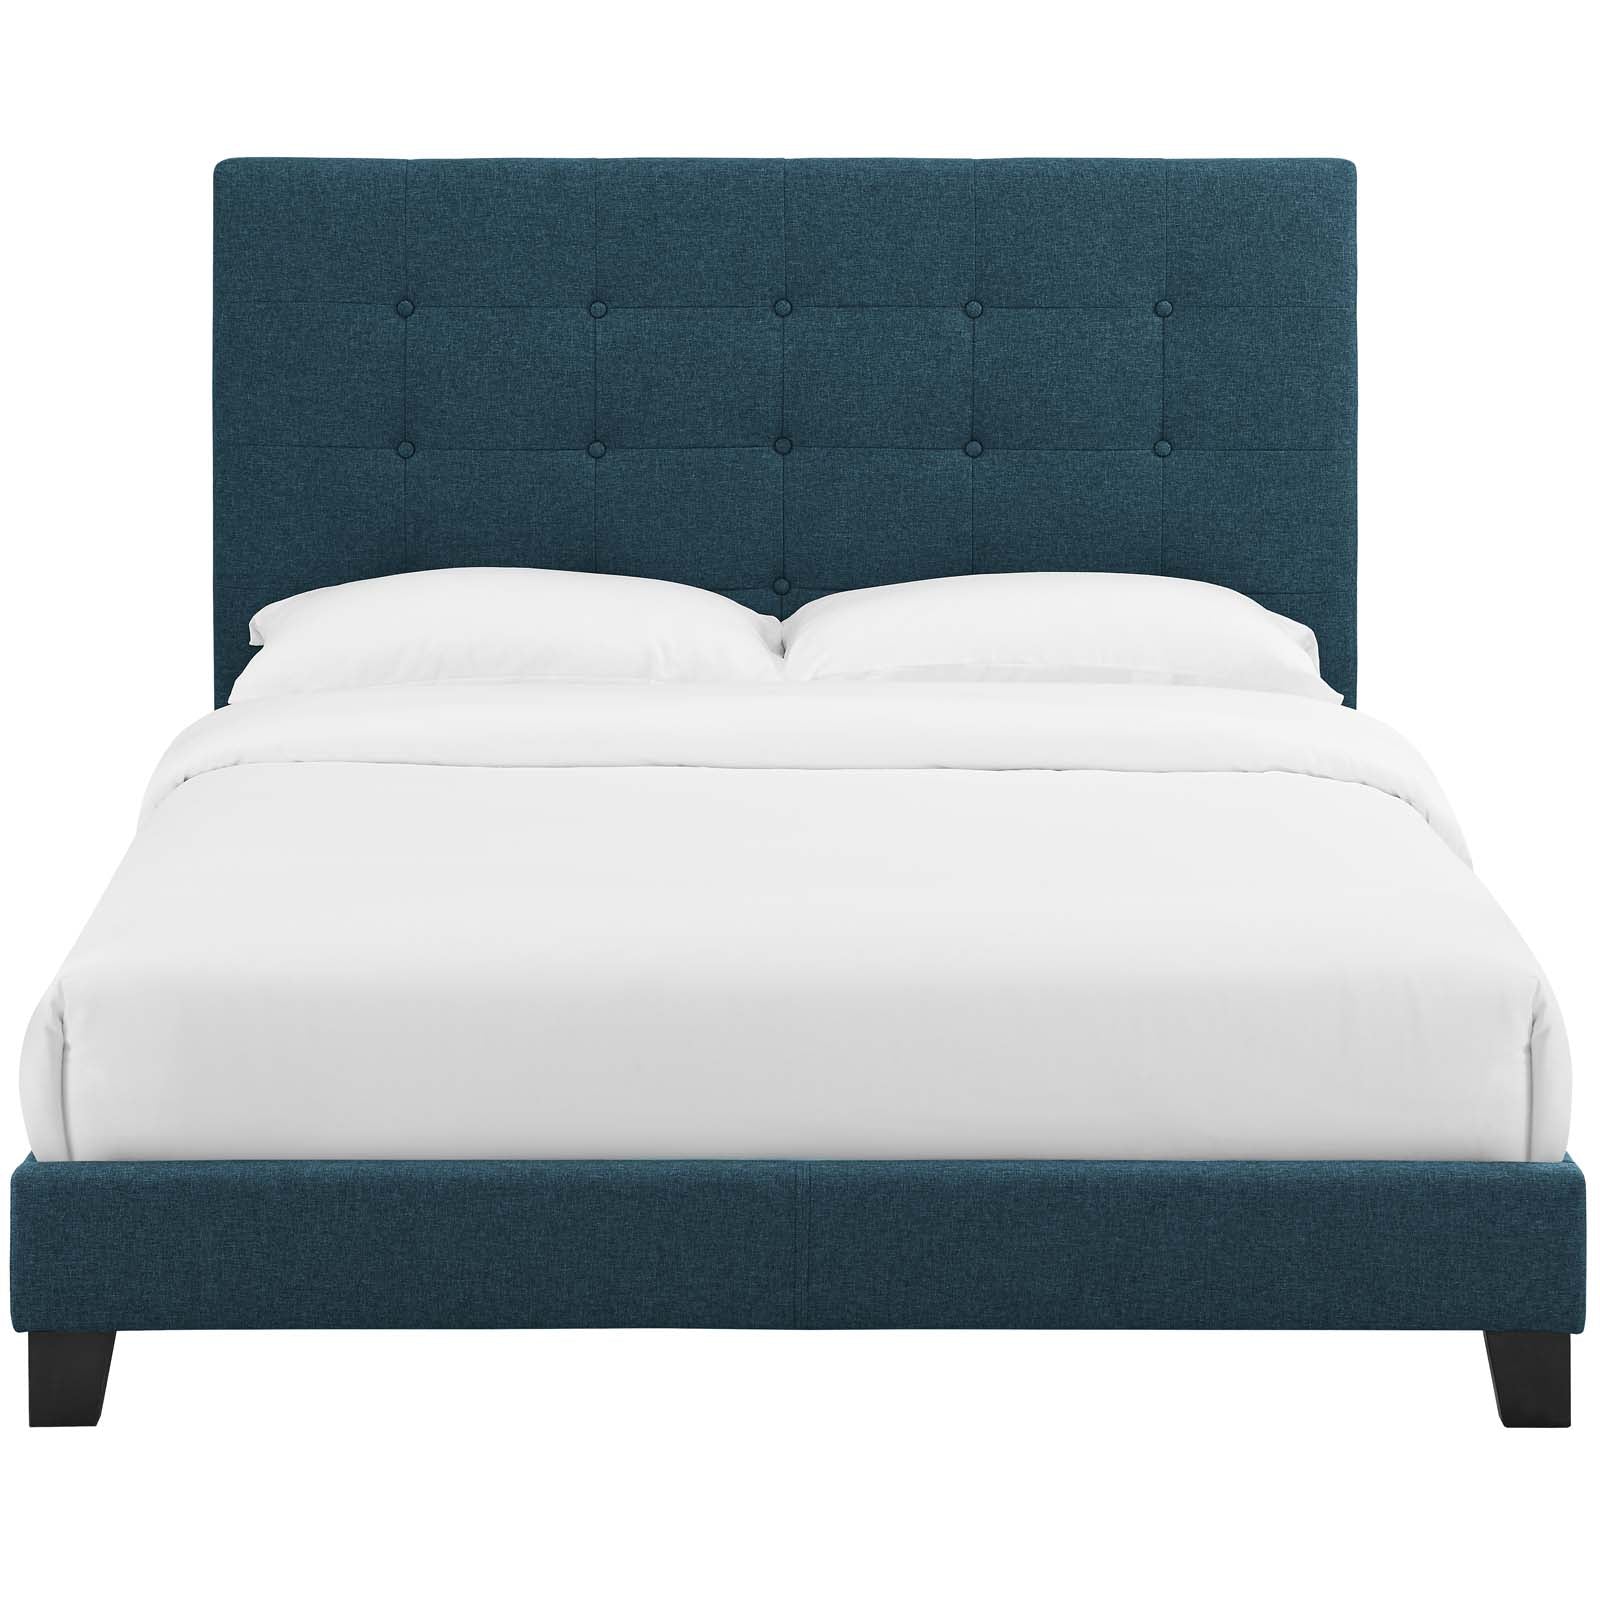 Modway Beds - Melanie Queen Tufted Button Upholstered Fabric Platform Bed Azure